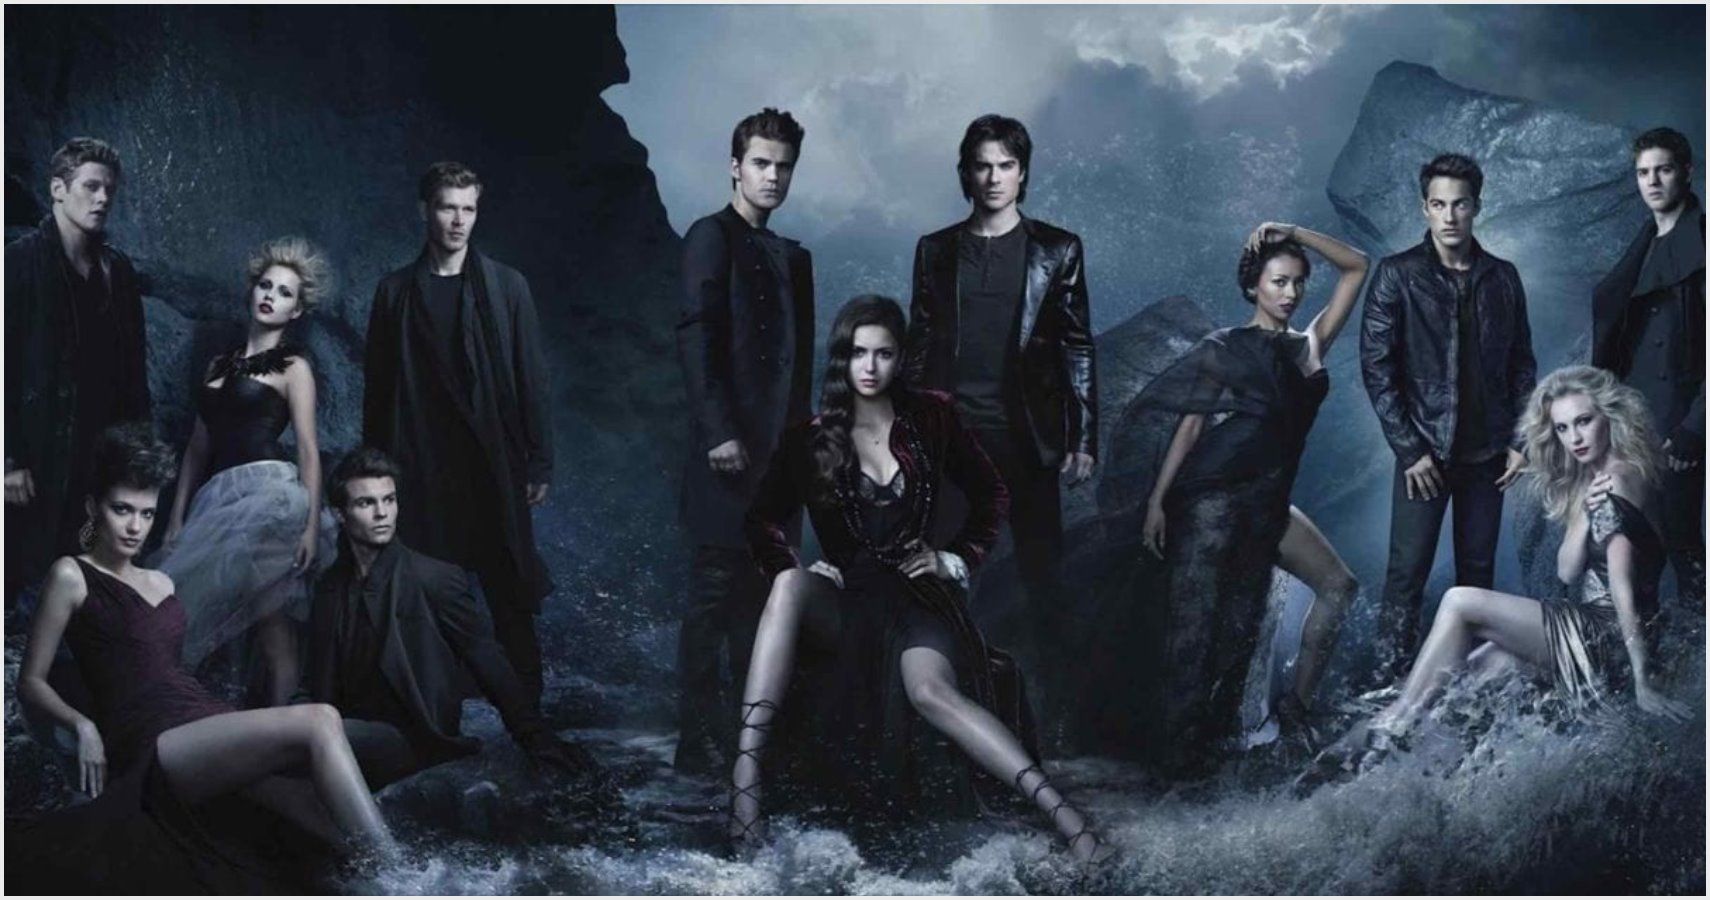 10 Unanswered Questions We Still Have About The Vampire Diaries